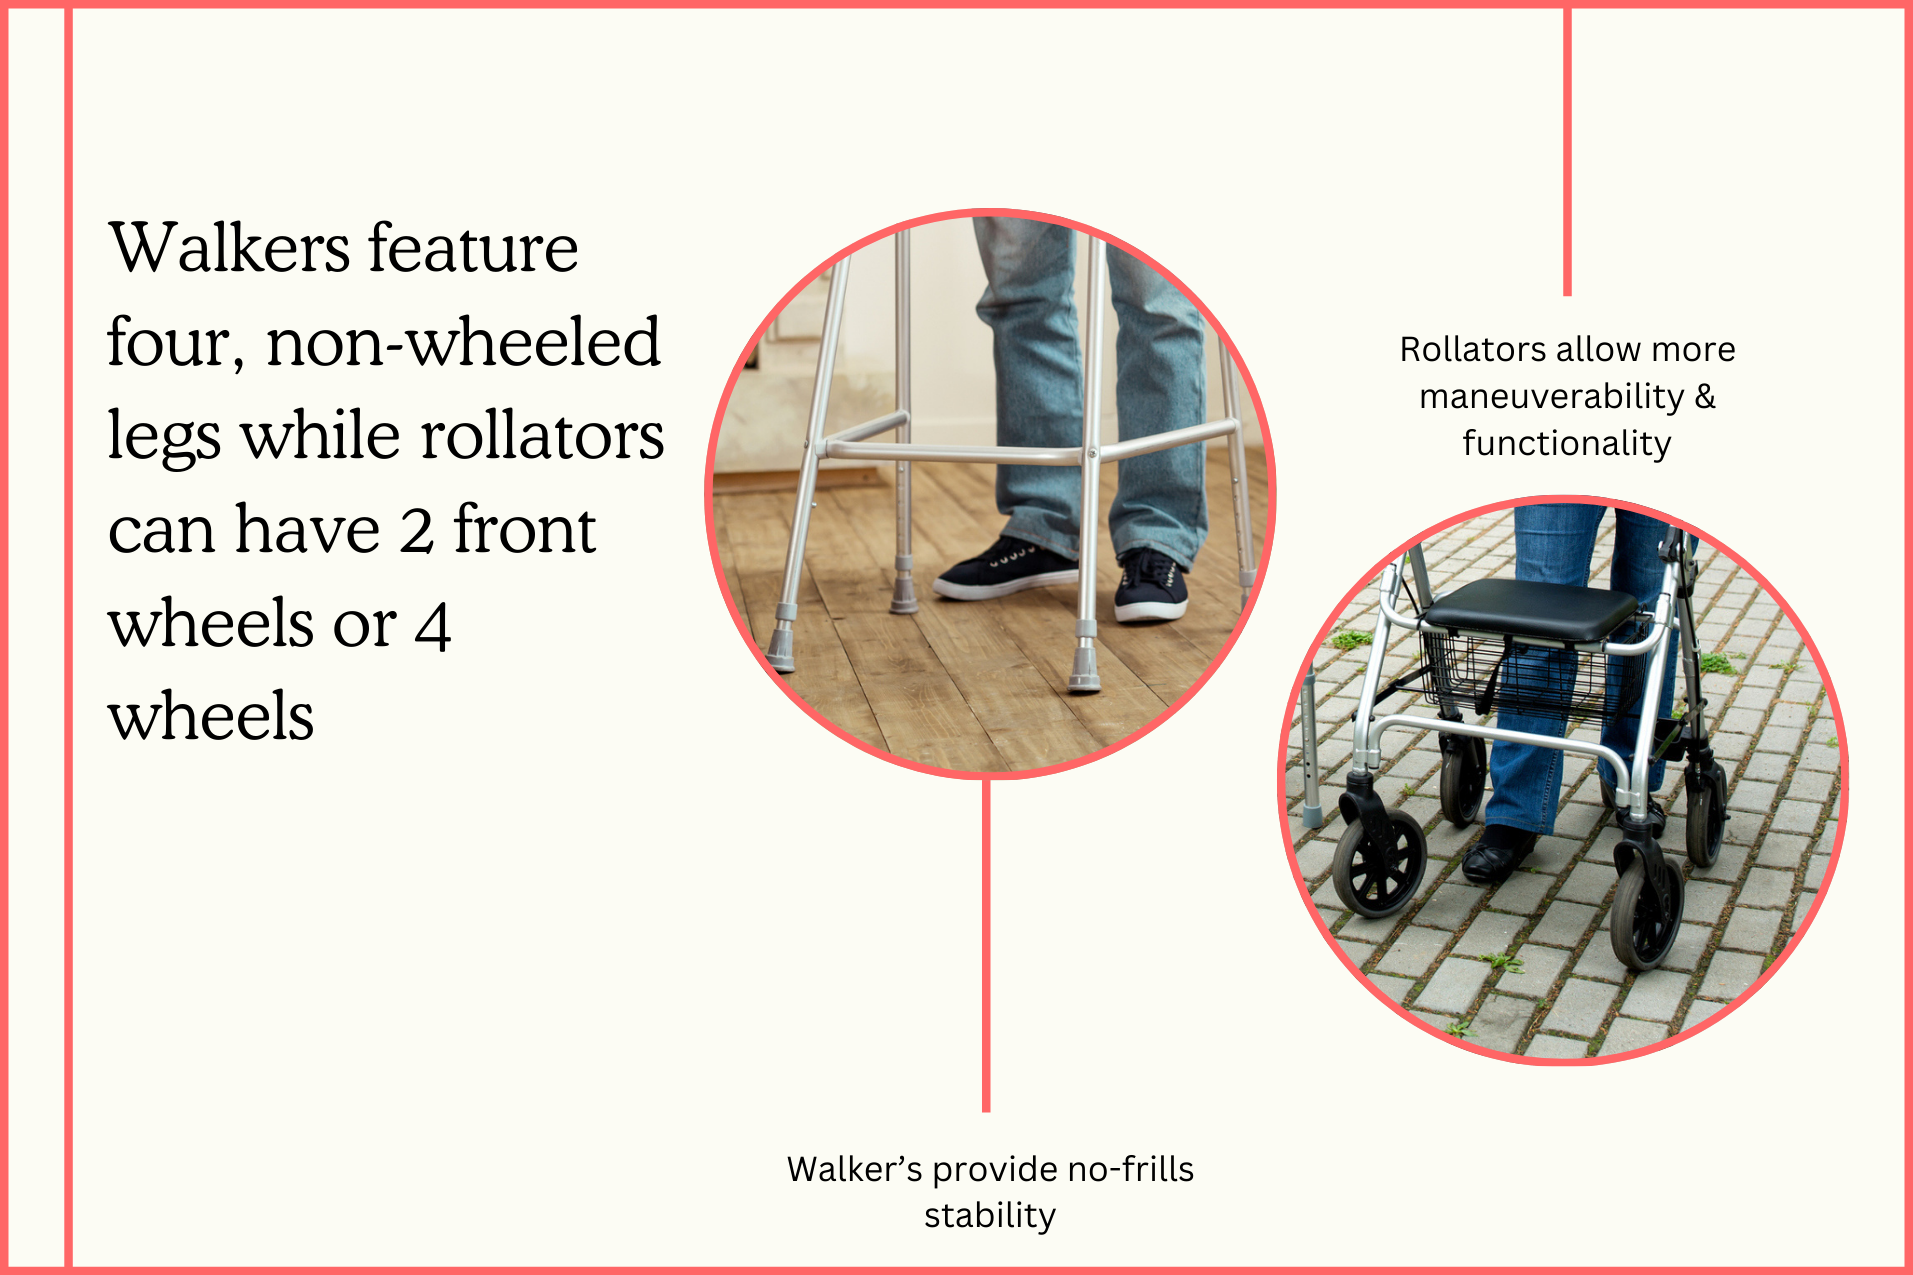 A graphic showing a close up of the four non-wheeled legs of a walker and a four-wheeled rollator for comparison.